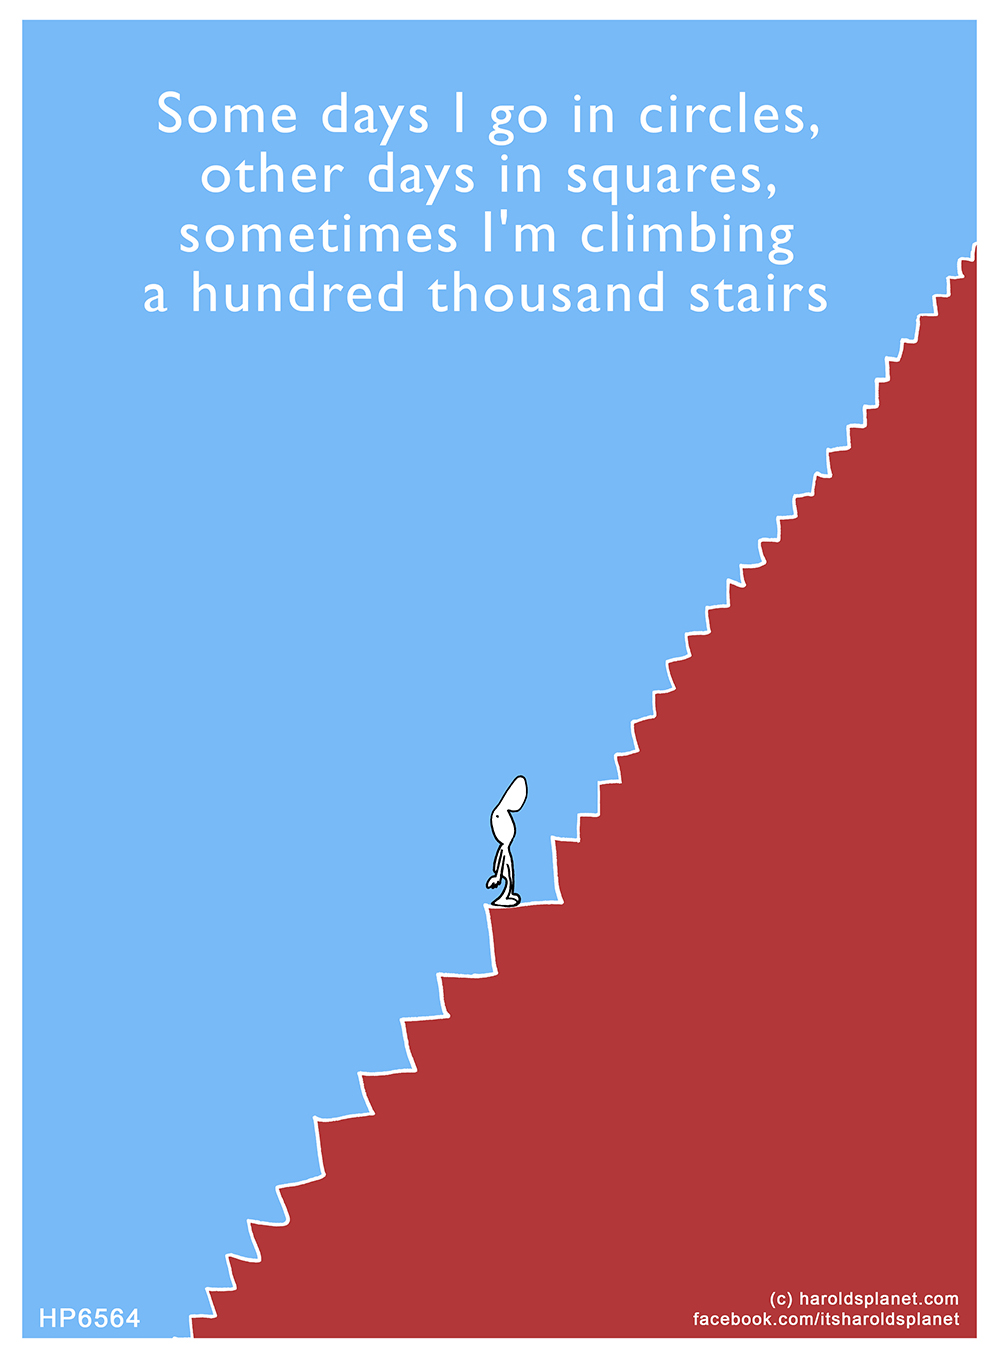 Harold's Planet: Some days I go in circles, other days in squares, sometimes I'm climbing a hundred thousand stairs